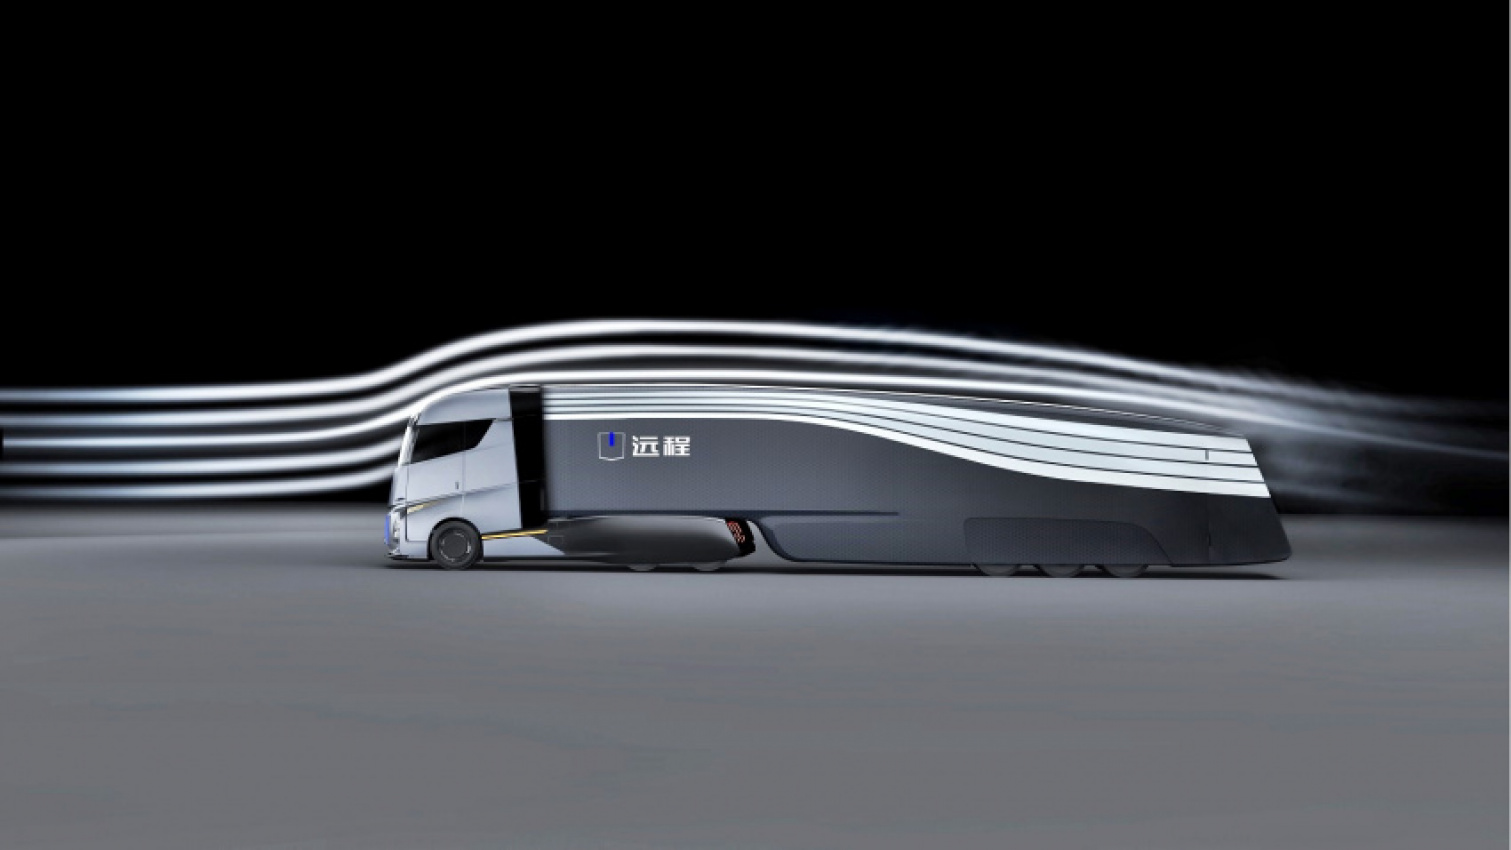 autos, cars, commercial vehicles, farizon auto, logistics, new energy vehicles, range extender, semi truck, zhejiang geely holding group., farizon auto’s futuristic semi-truck will be rolling on china’s roads in 2024